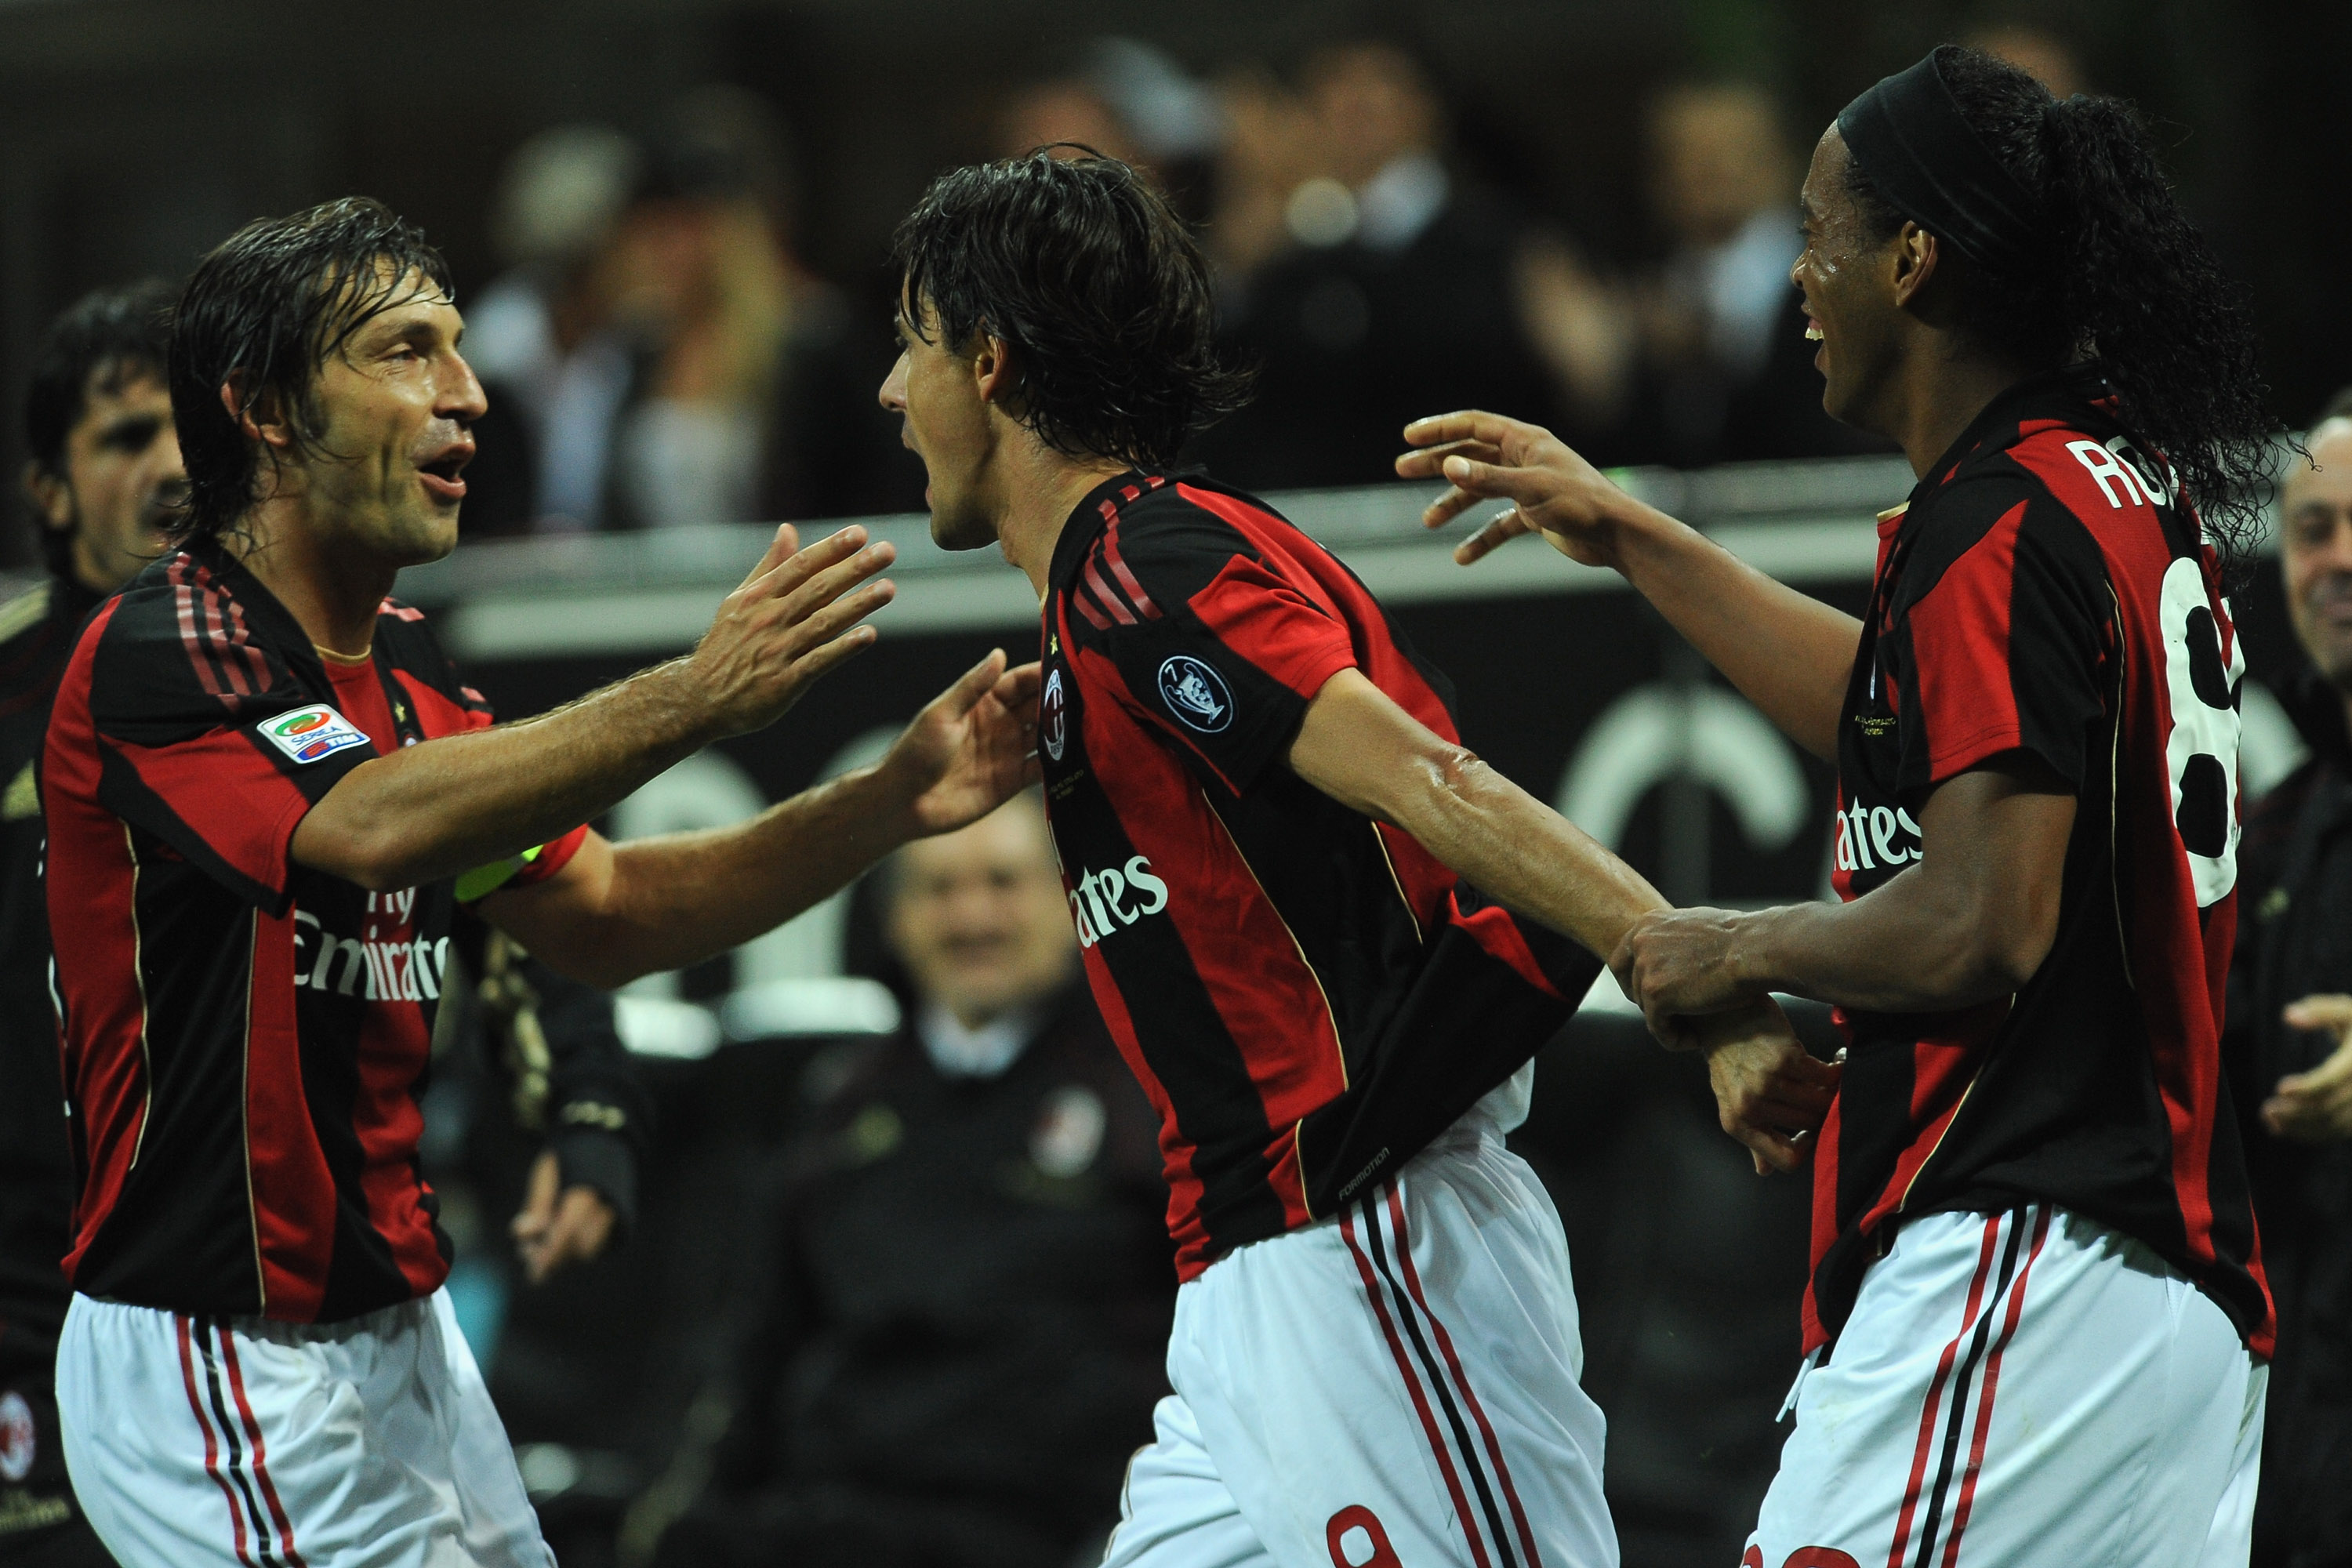 MILAN, ITALY - SEPTEMBER 18:  Filippo Inzaghi (C) of AC Milan celebrates his goal with Andrea Pirlo (L) and Ronaldinho (R) during the Serie A match between AC Milan and Catania Calcio at Stadio Giuseppe Meazza on September 18, 2010 in Milan, Italy.  (Phot